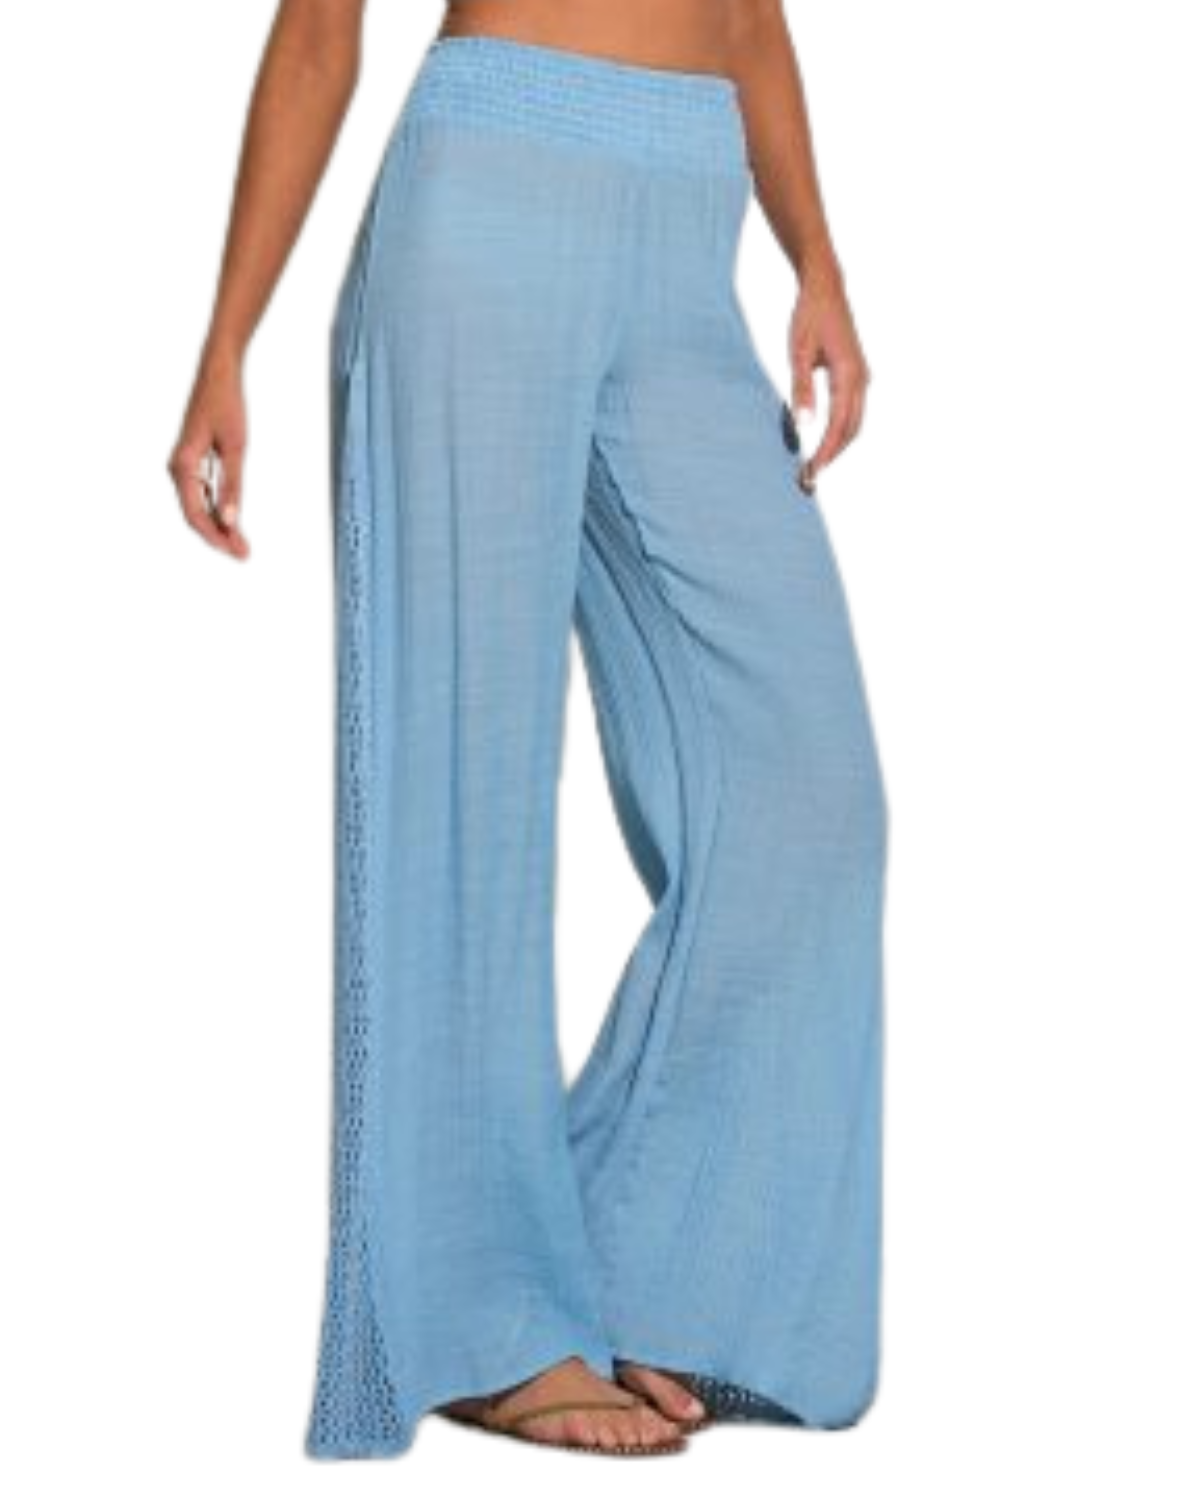 Model wearing a cover up pant with crochet side detail in light blue